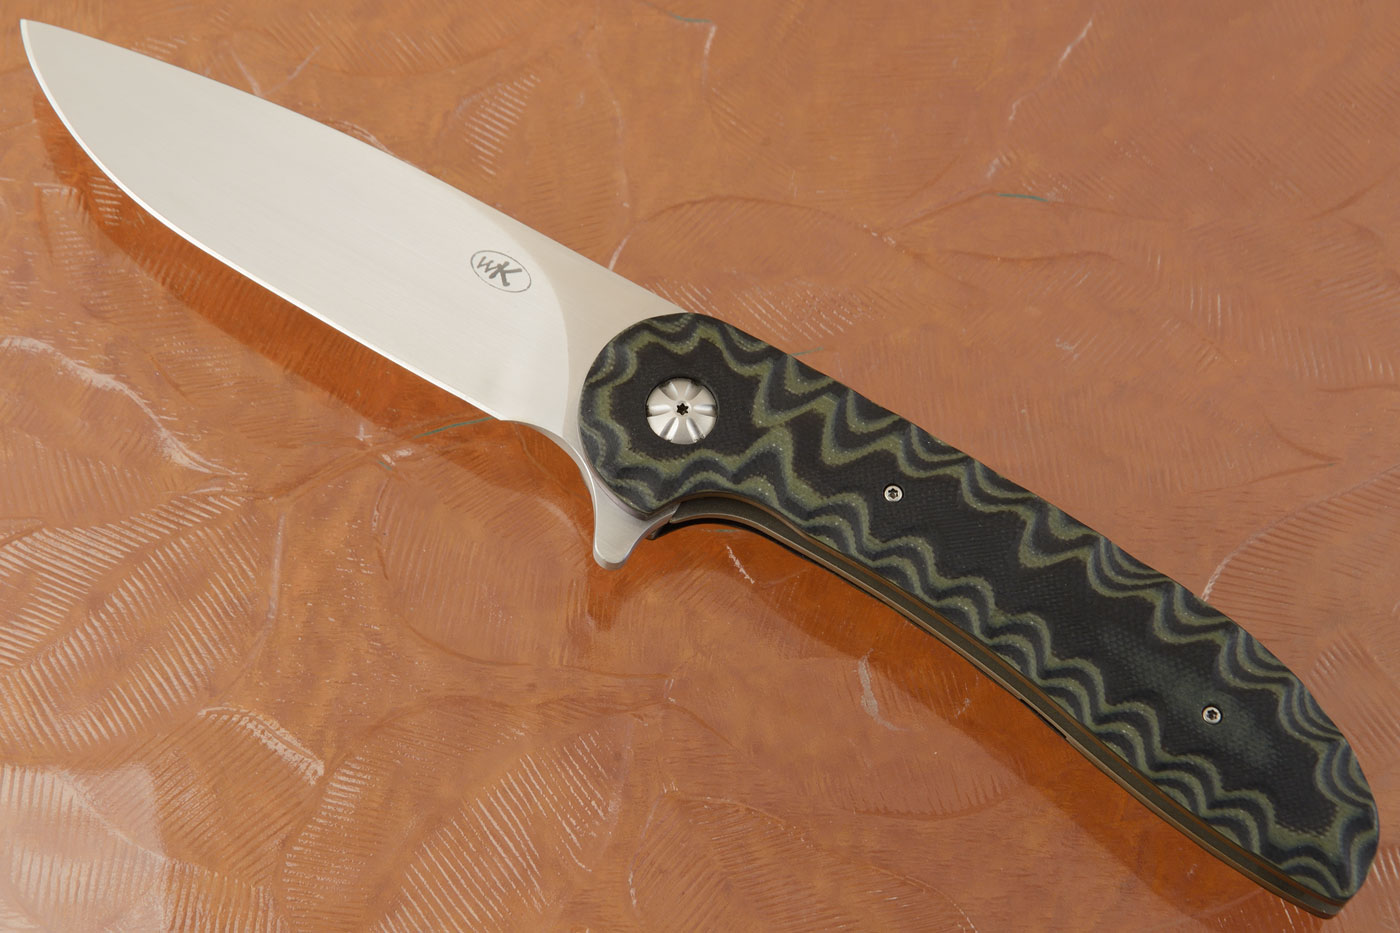 H1 Flipper with Camouflage G10